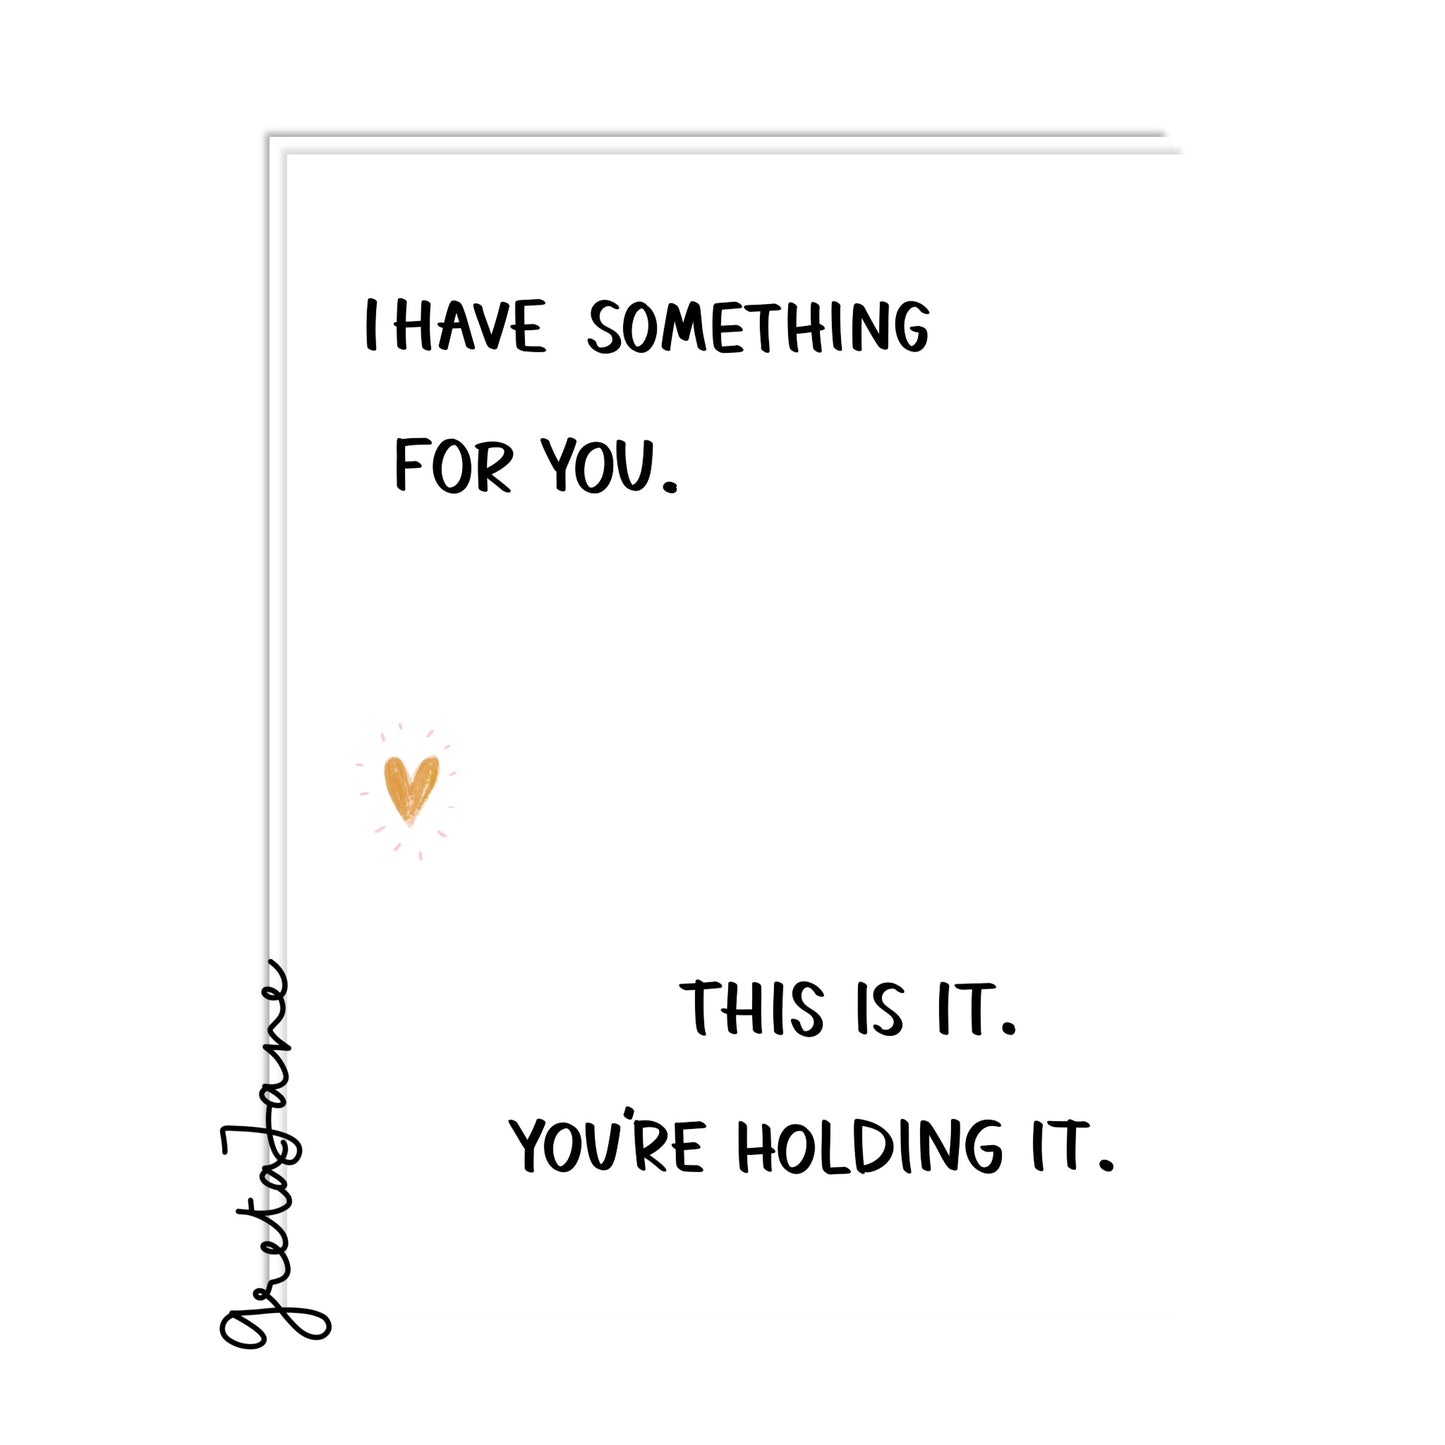 I have something for you...